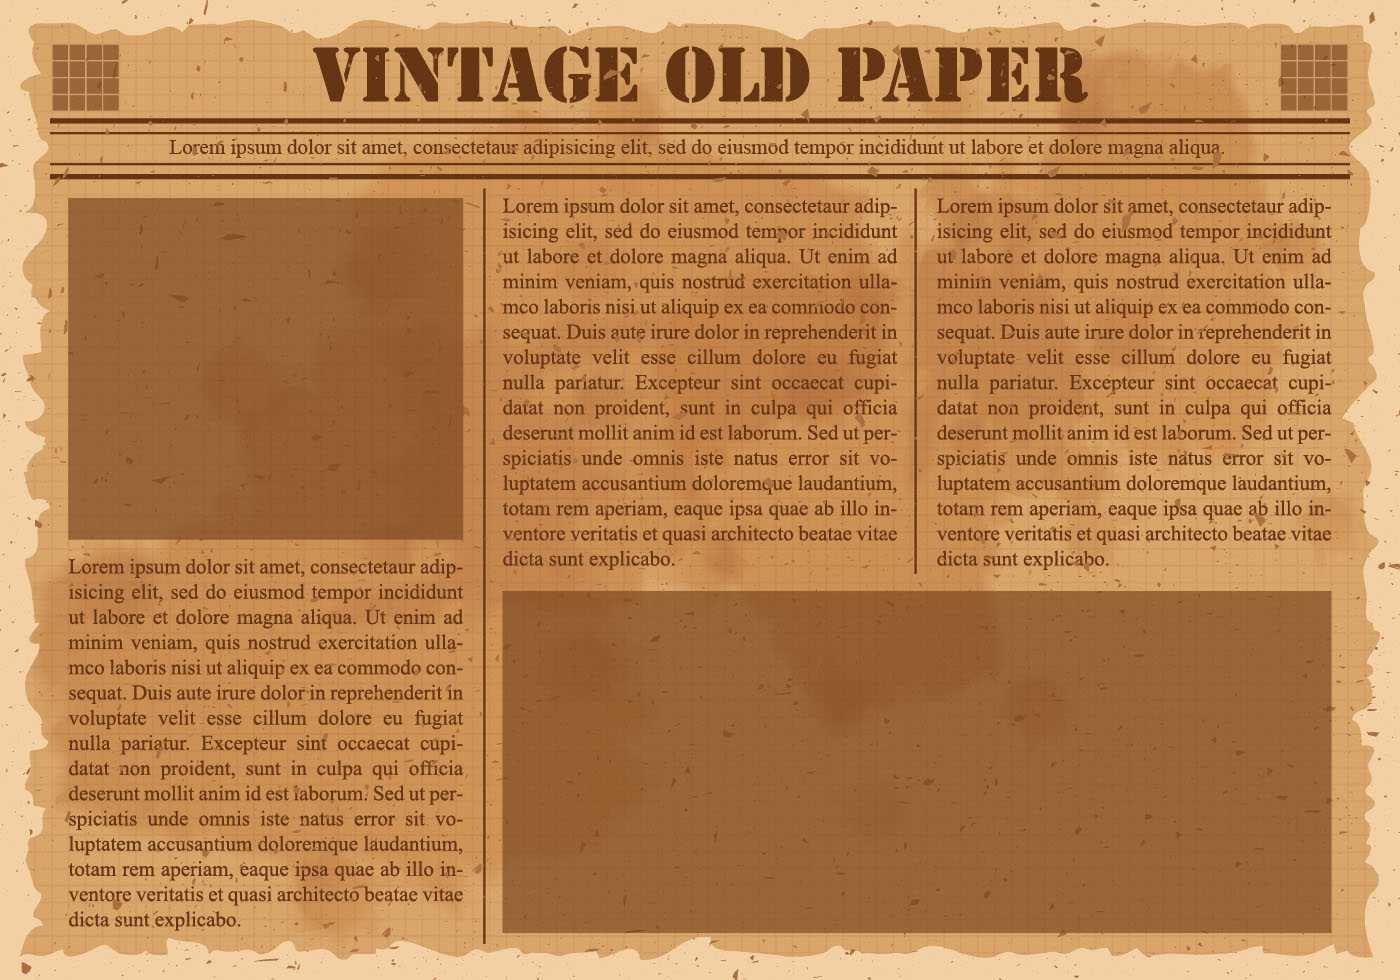 Old Vintage Newspaper - Download Free Vectors, Clipart For Old Blank Newspaper Template